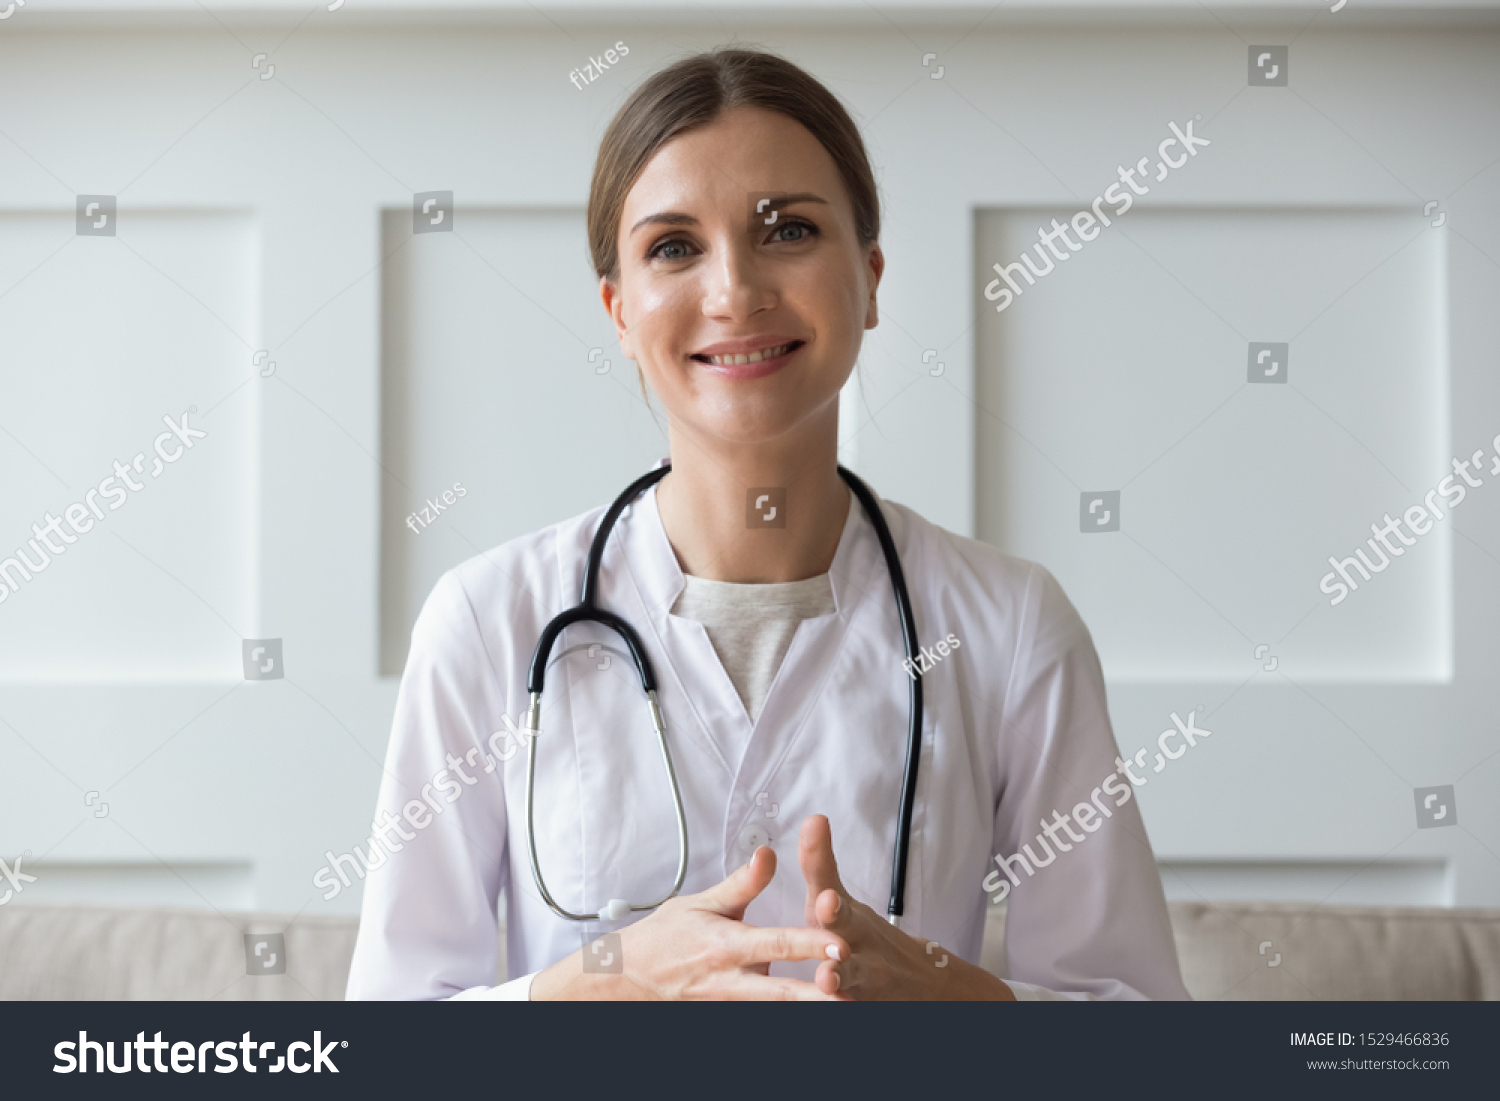 Head shot of woman wearing white coat stethoscope on shoulders looking at camera, doctor make video call interact through internet talk with patient provide help online counseling and therapy concept #1529466836